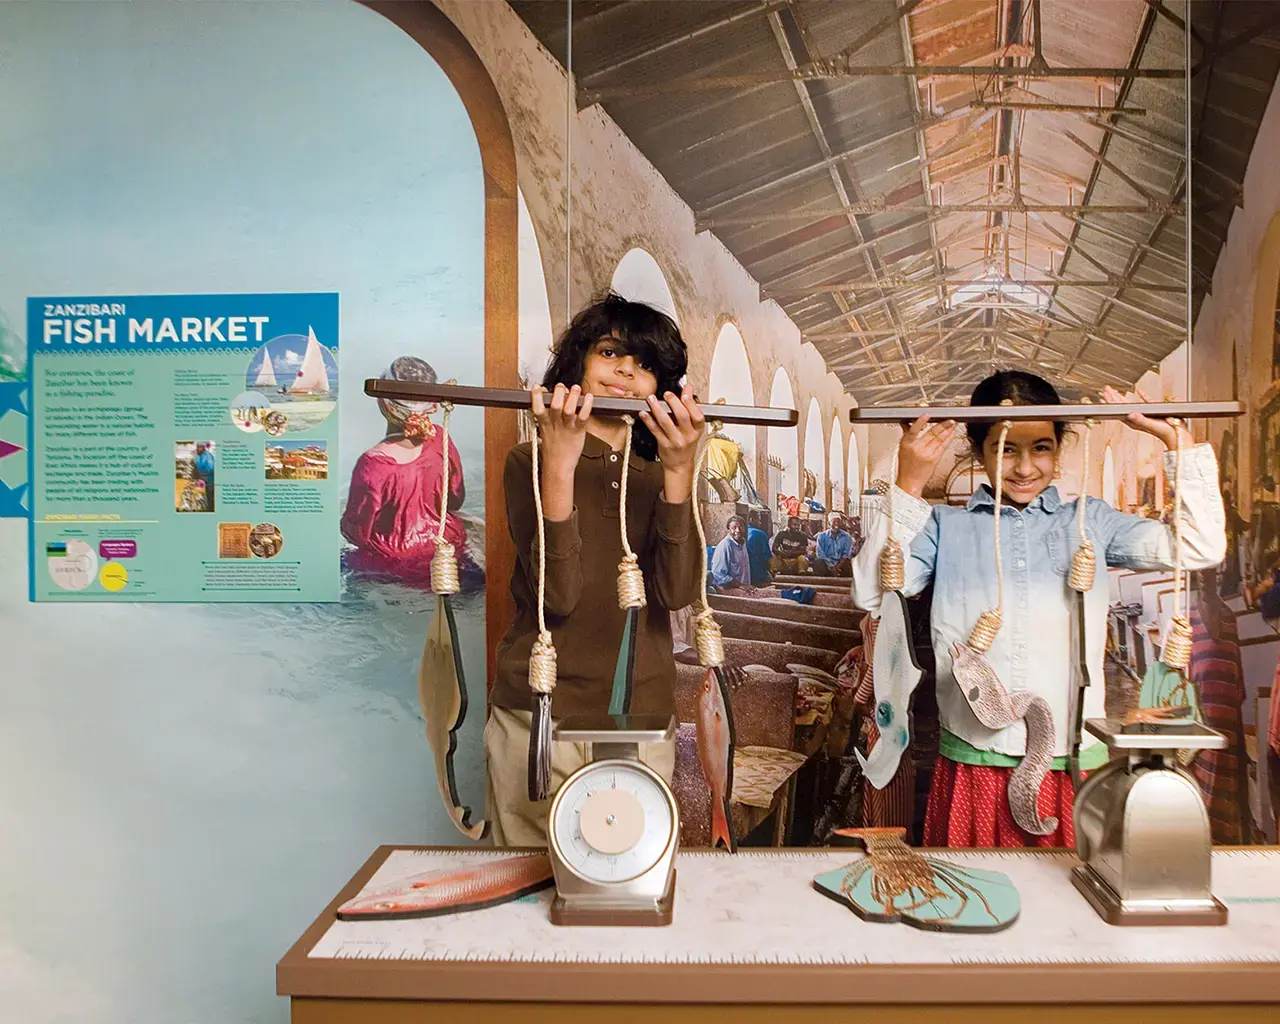 Please Touch Museum, American to Zanzibar, fishing lines modeled after traditional Zanzibari longline fishing gear. Photo courtesy of Please Touch Museum.